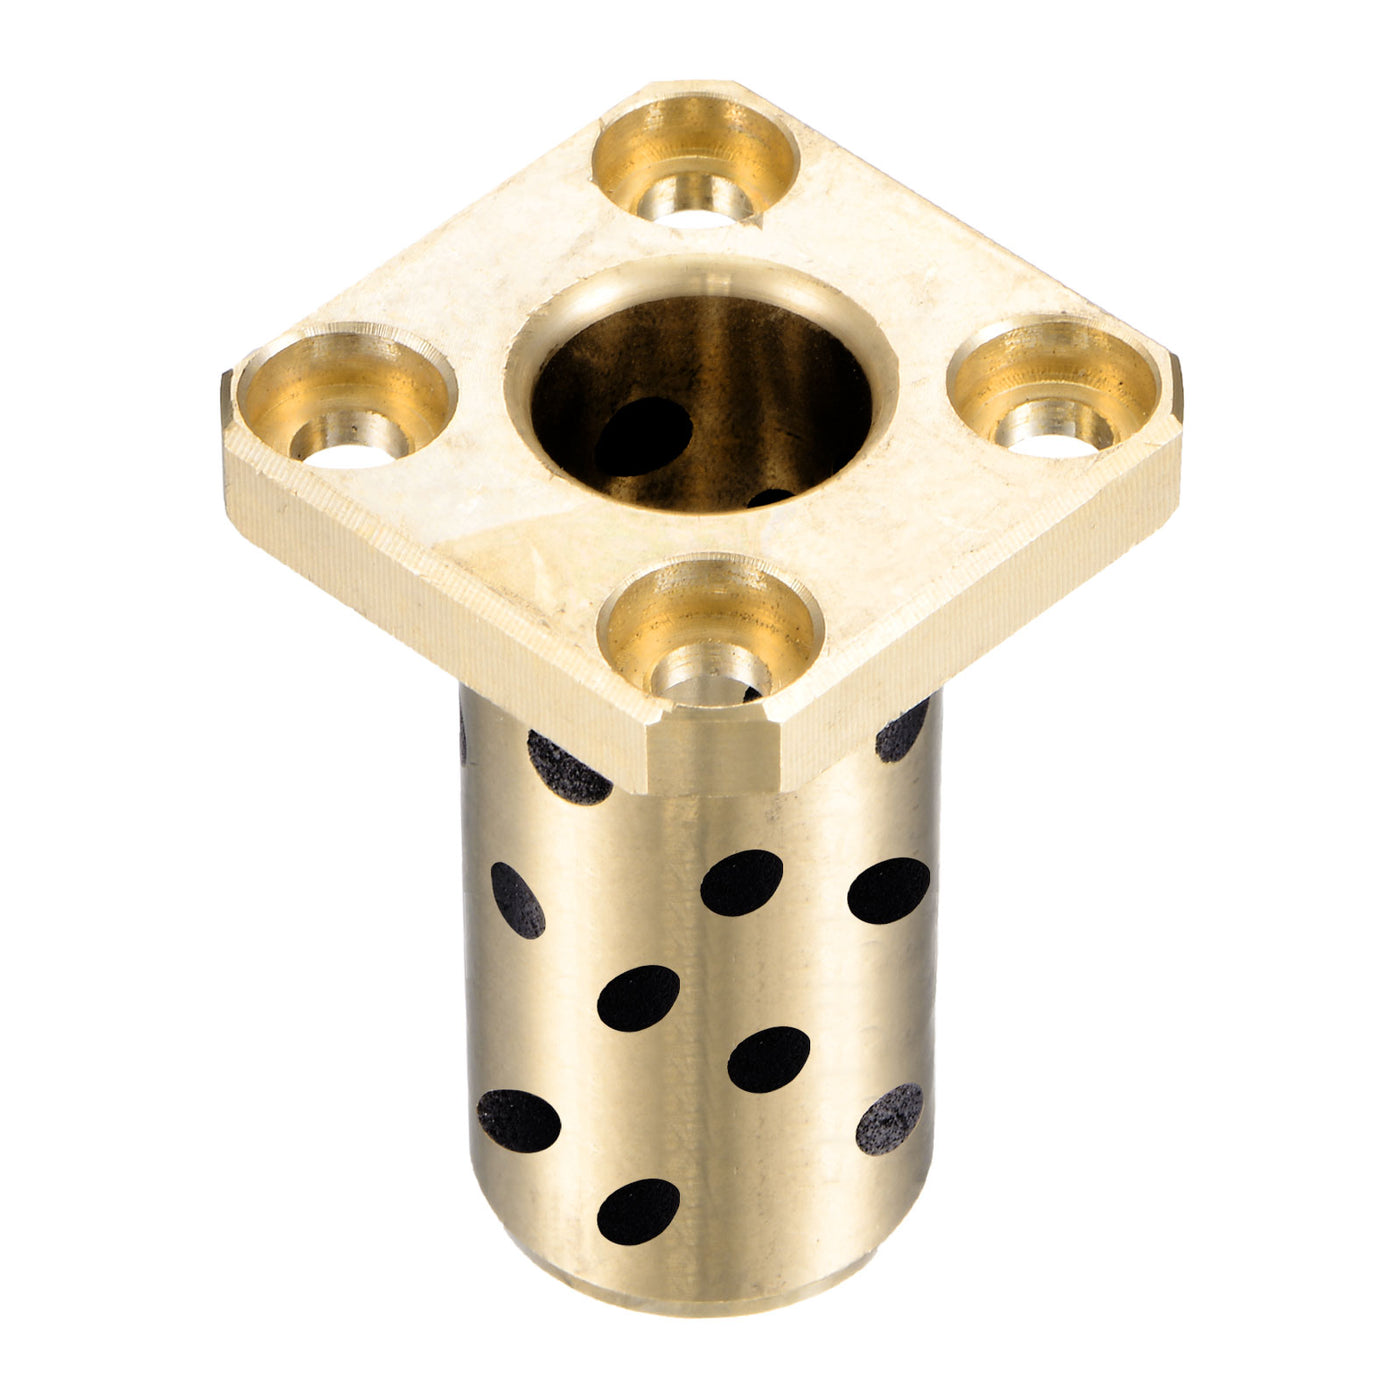 uxcell Uxcell Sleeve Bearings Square Flanged Wrapped Oilless Bushings